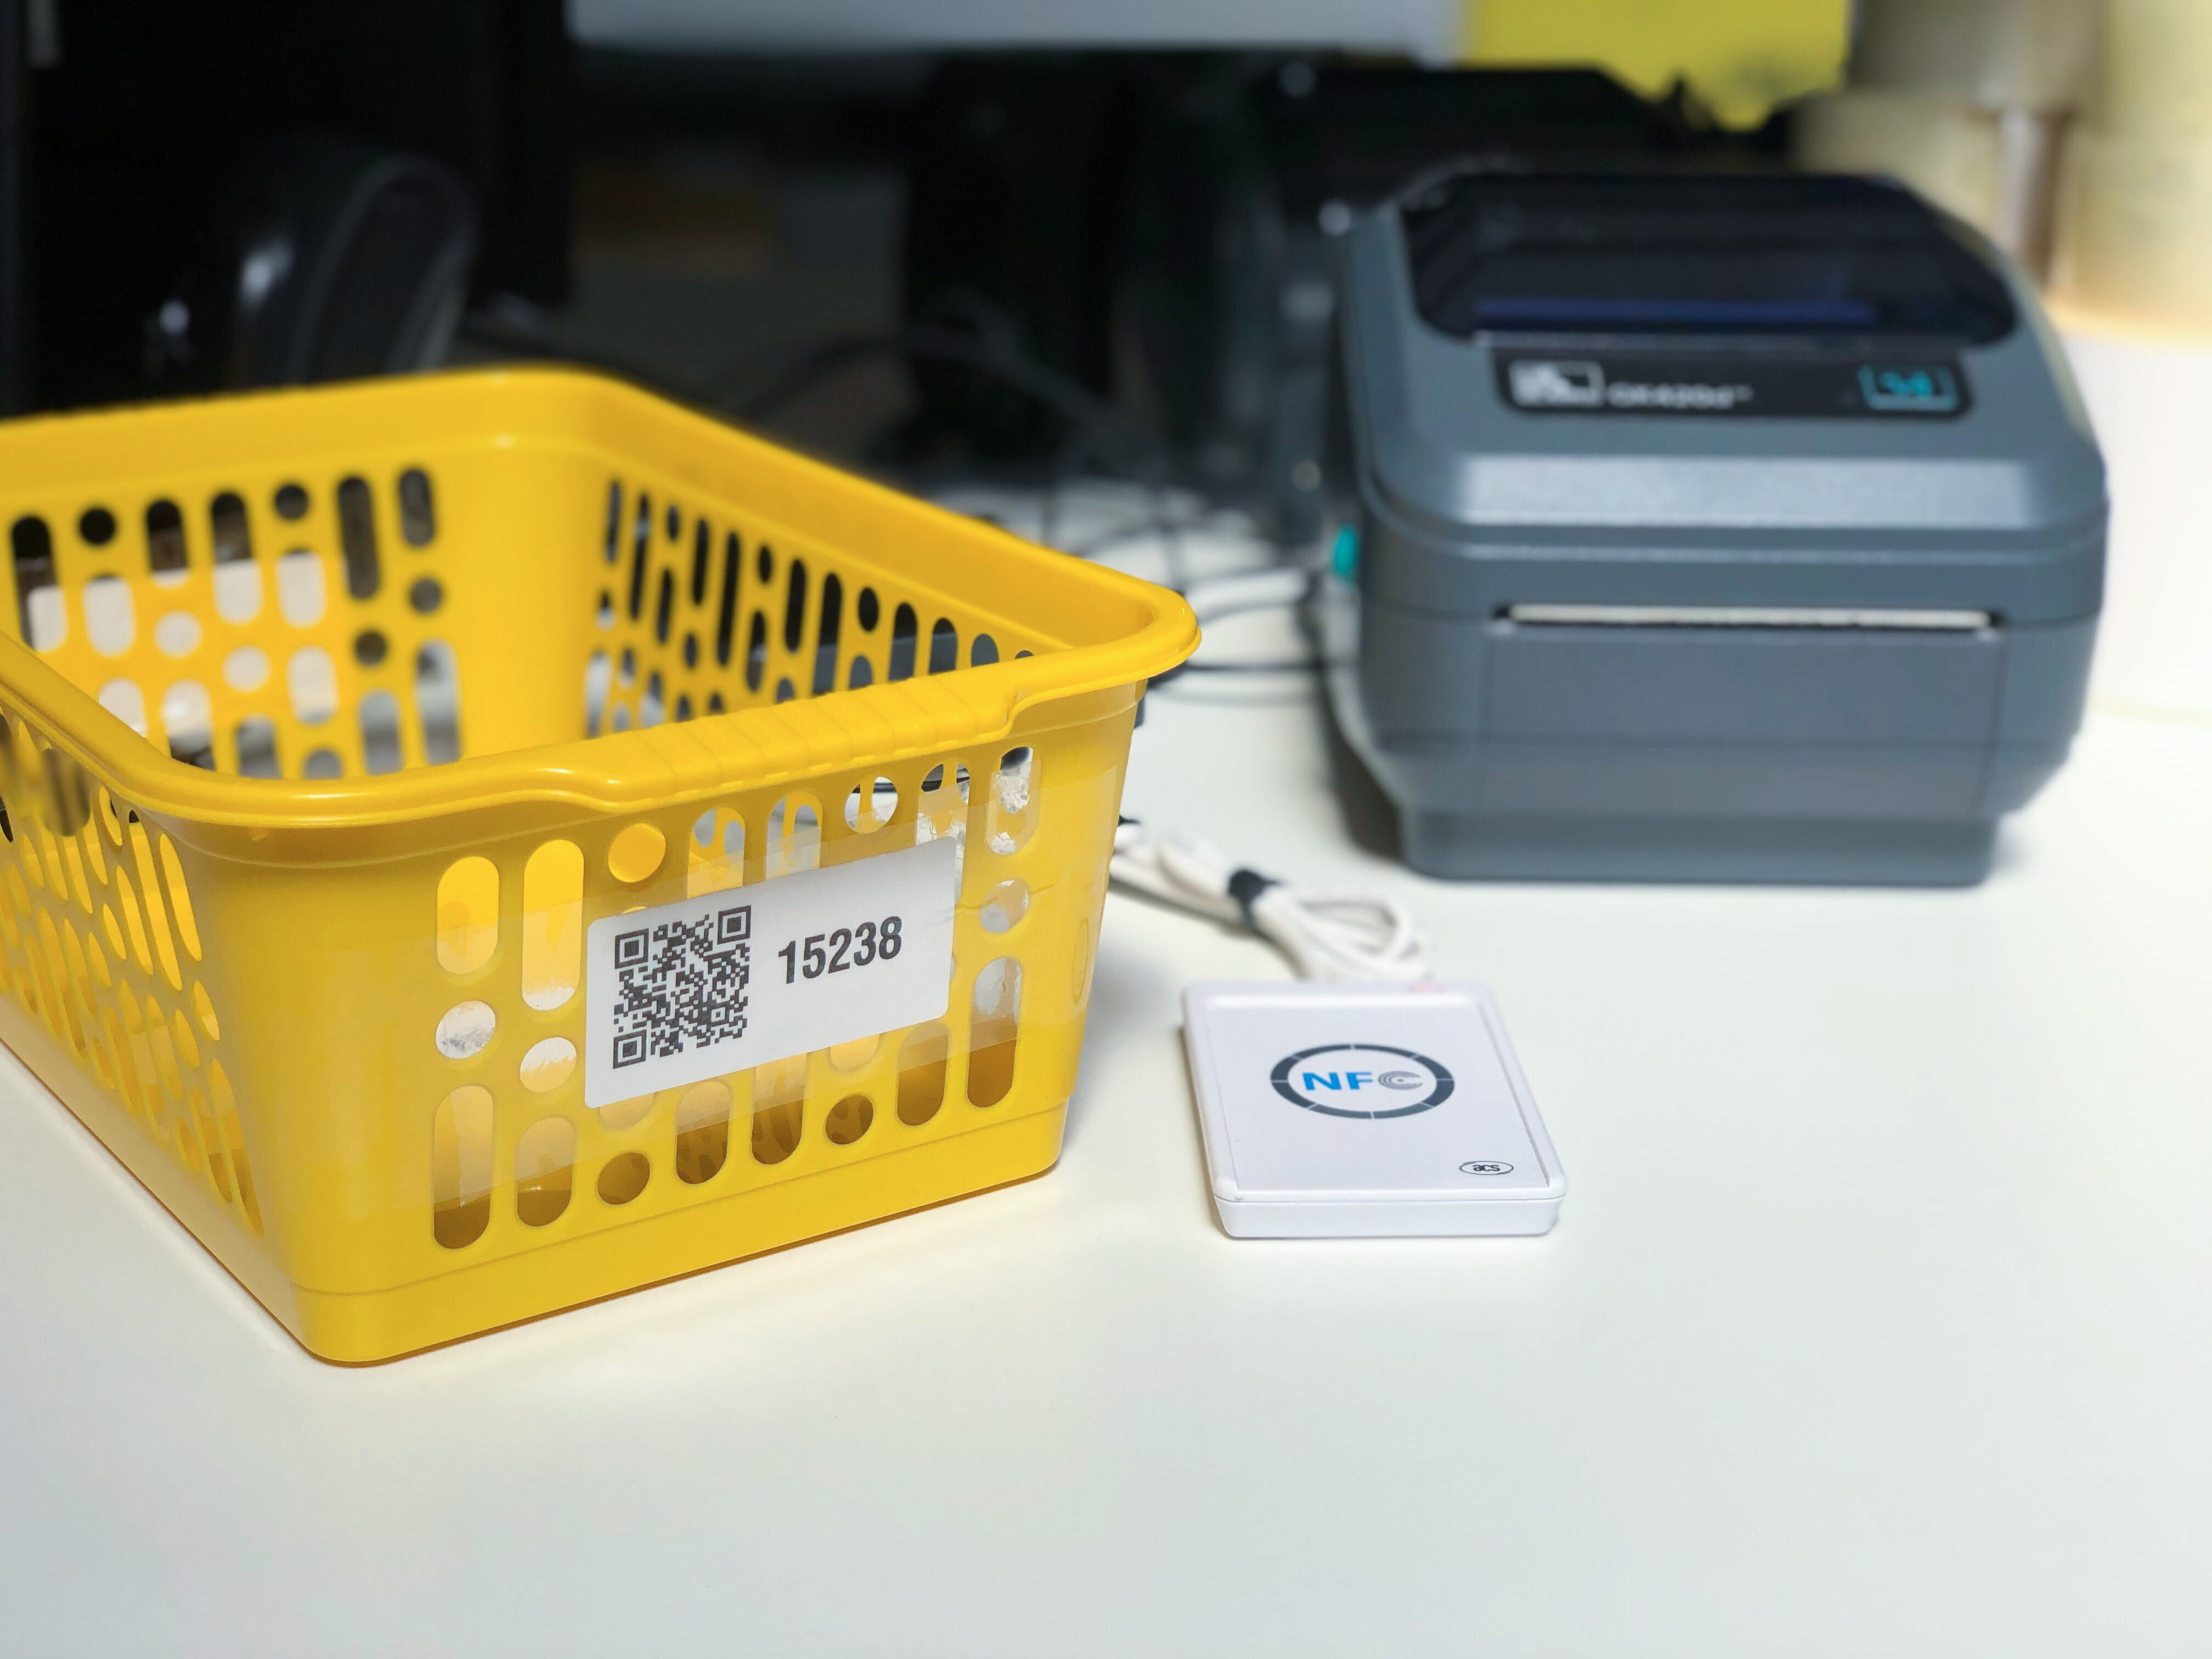 A basket with a barcode on it, an NFC touch pad and a thermal printer